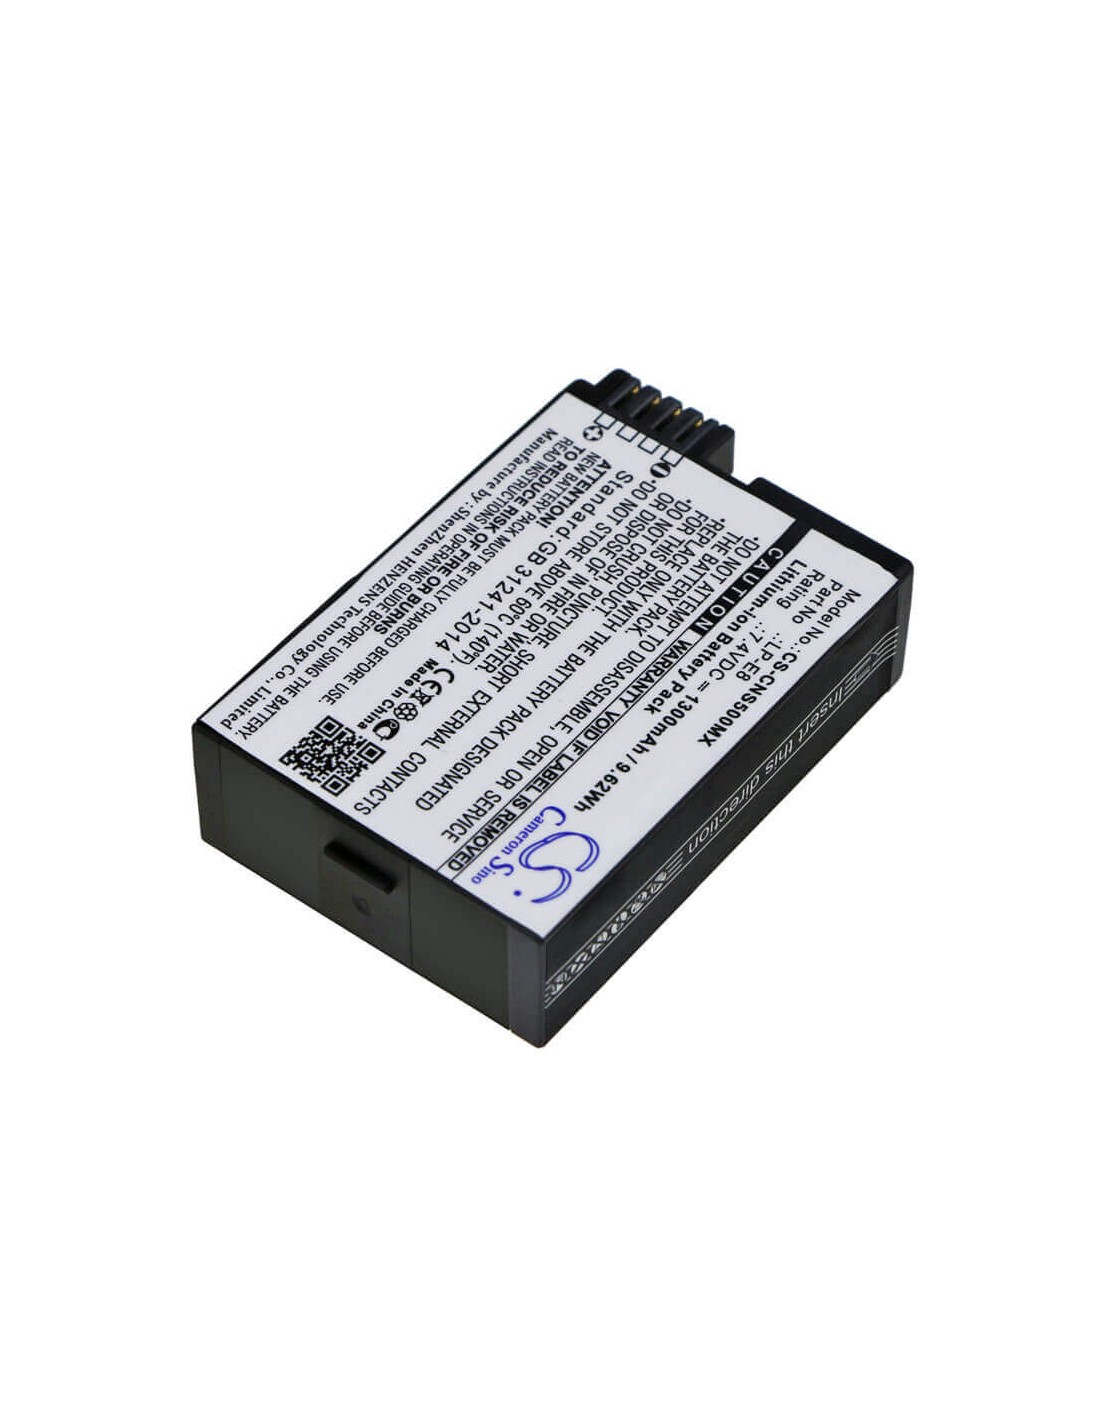 Battery for Canon, Ef-s, Eos 550d, Eos 600d 7.4V, 1300mAh - 9.62Wh